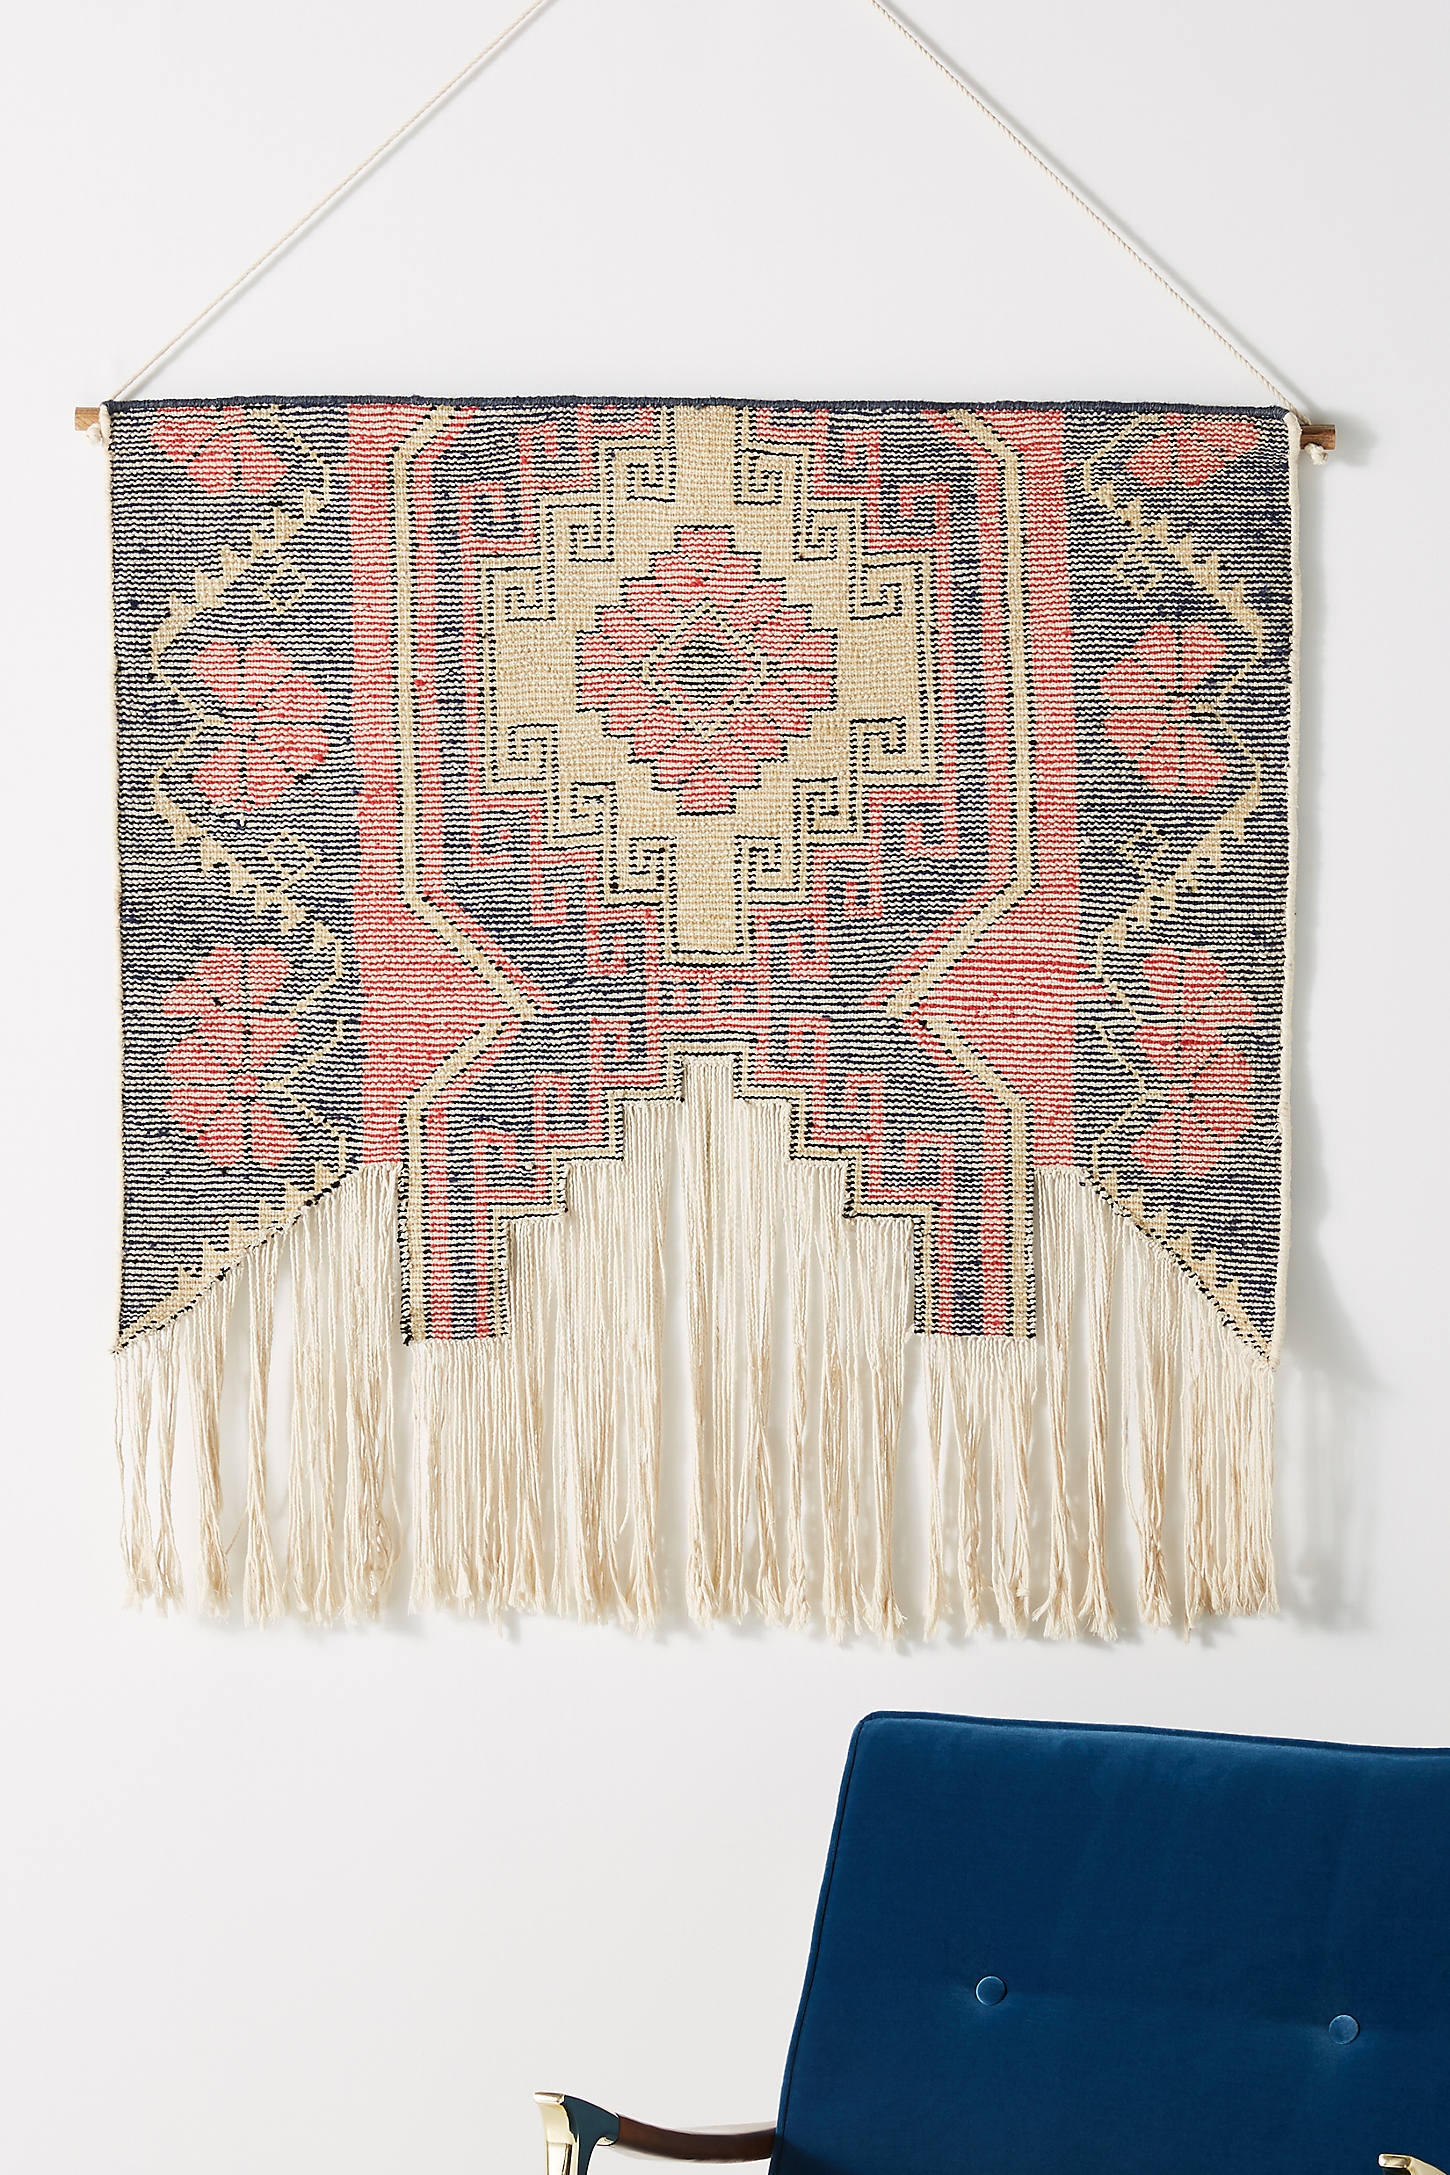 Anya Knotted Tapestry Wall Hanging - Image 0